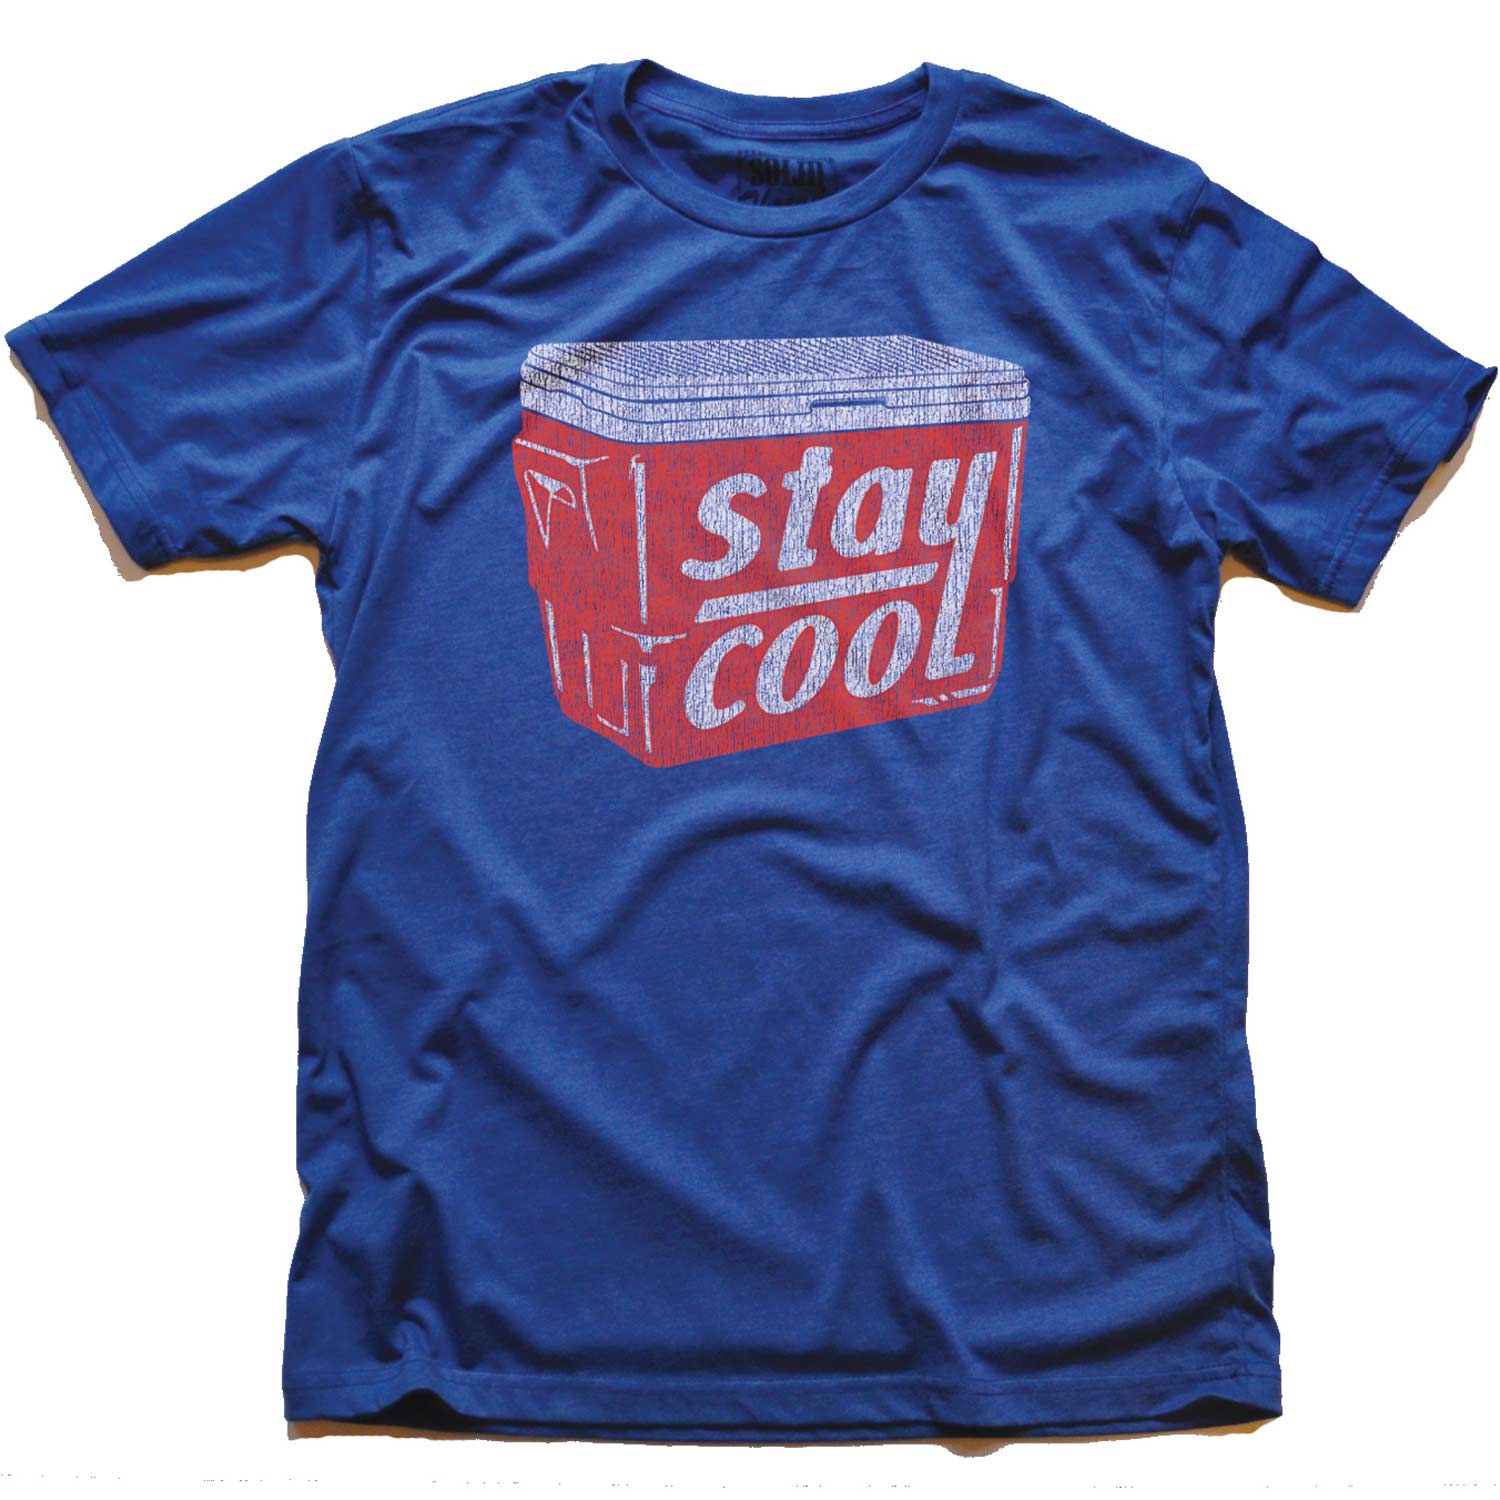 Men's Vintage Stay Cool Graphic Tee | Retro Summer Drinking T-shirt | Solid Threads